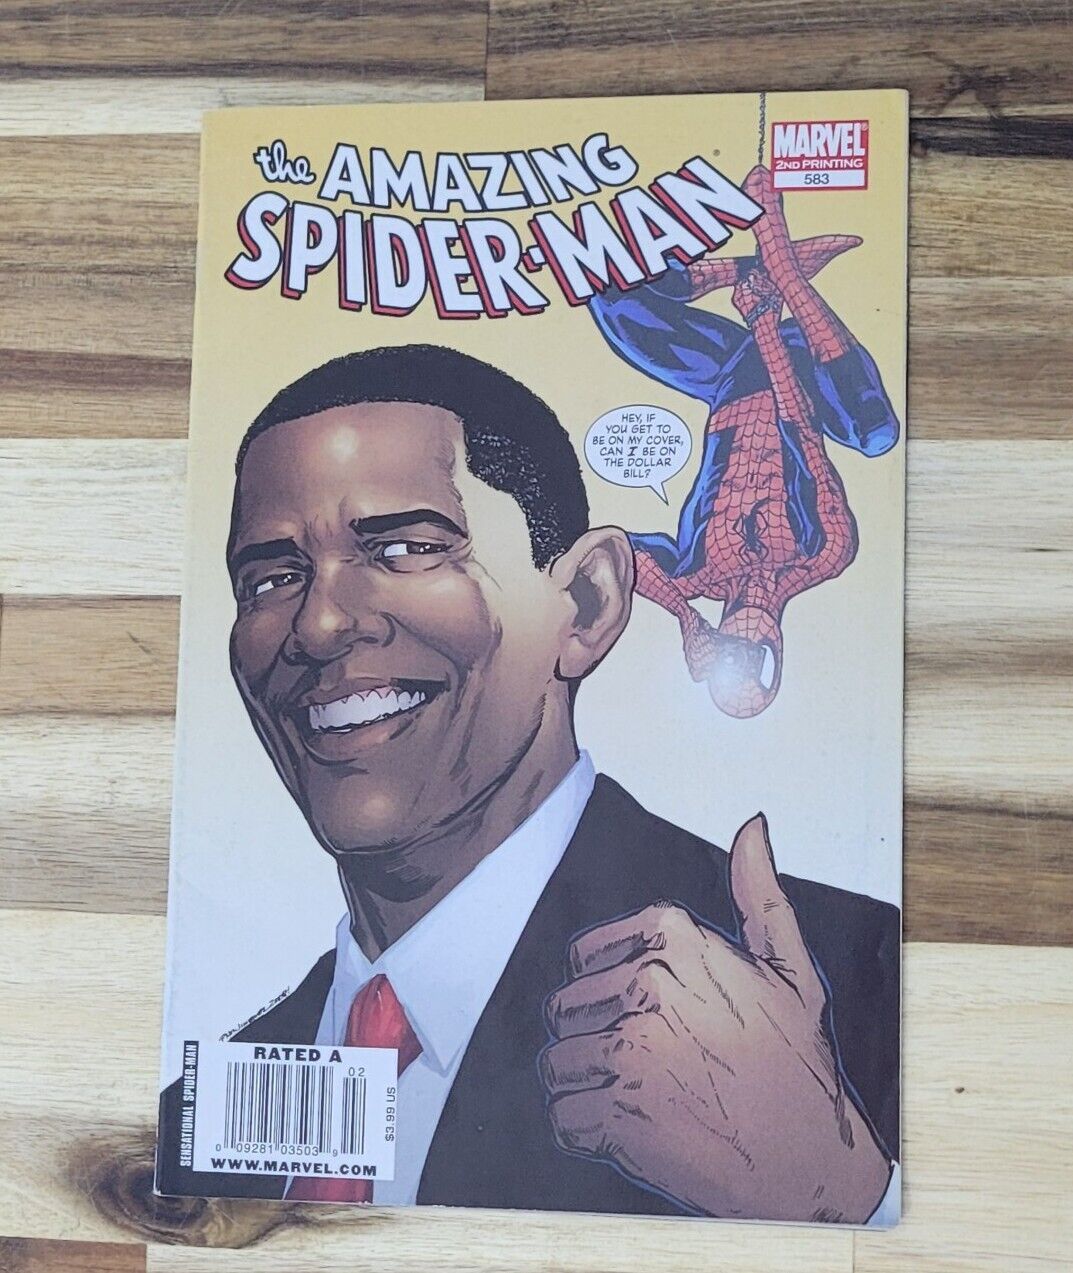 The Amazing Spider-Man #583, 2nd Print Variant Obama Cover, Jan 2009, HIGH GRADE